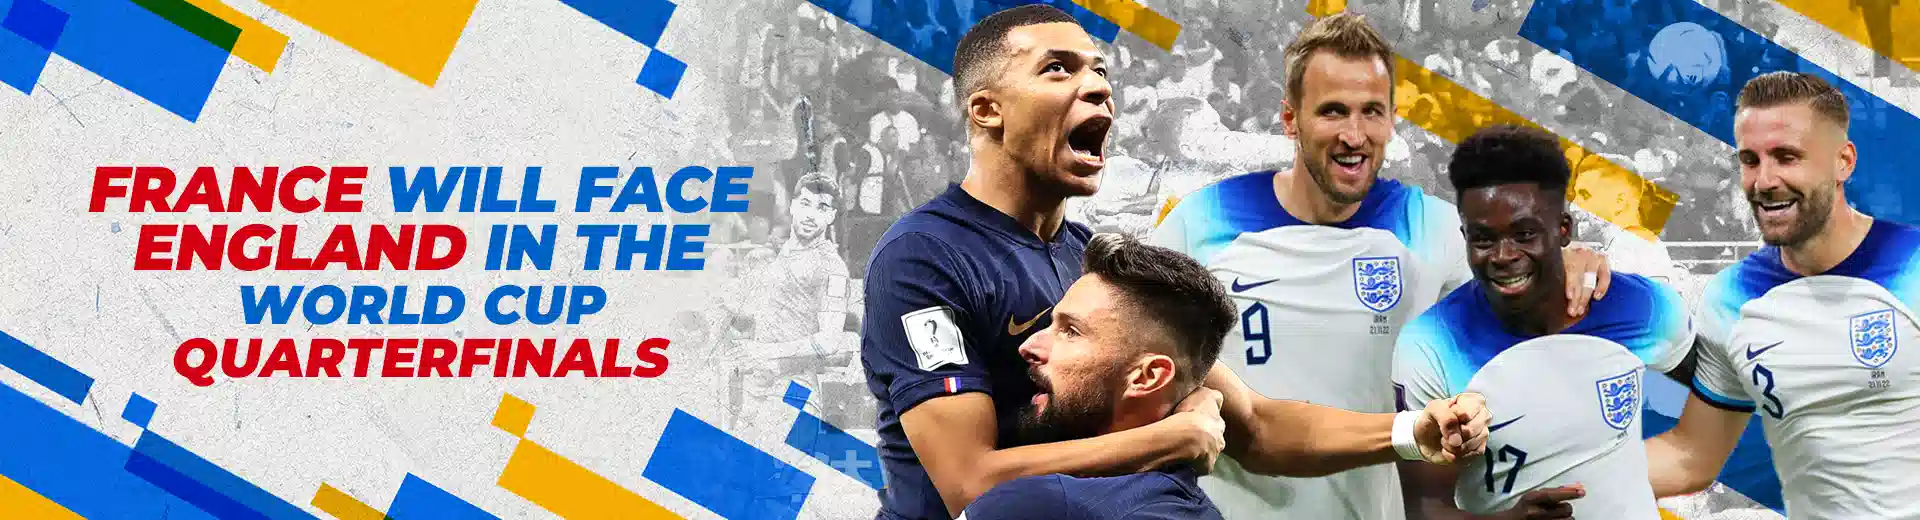 France will face England in the World Cup Quarterfinals